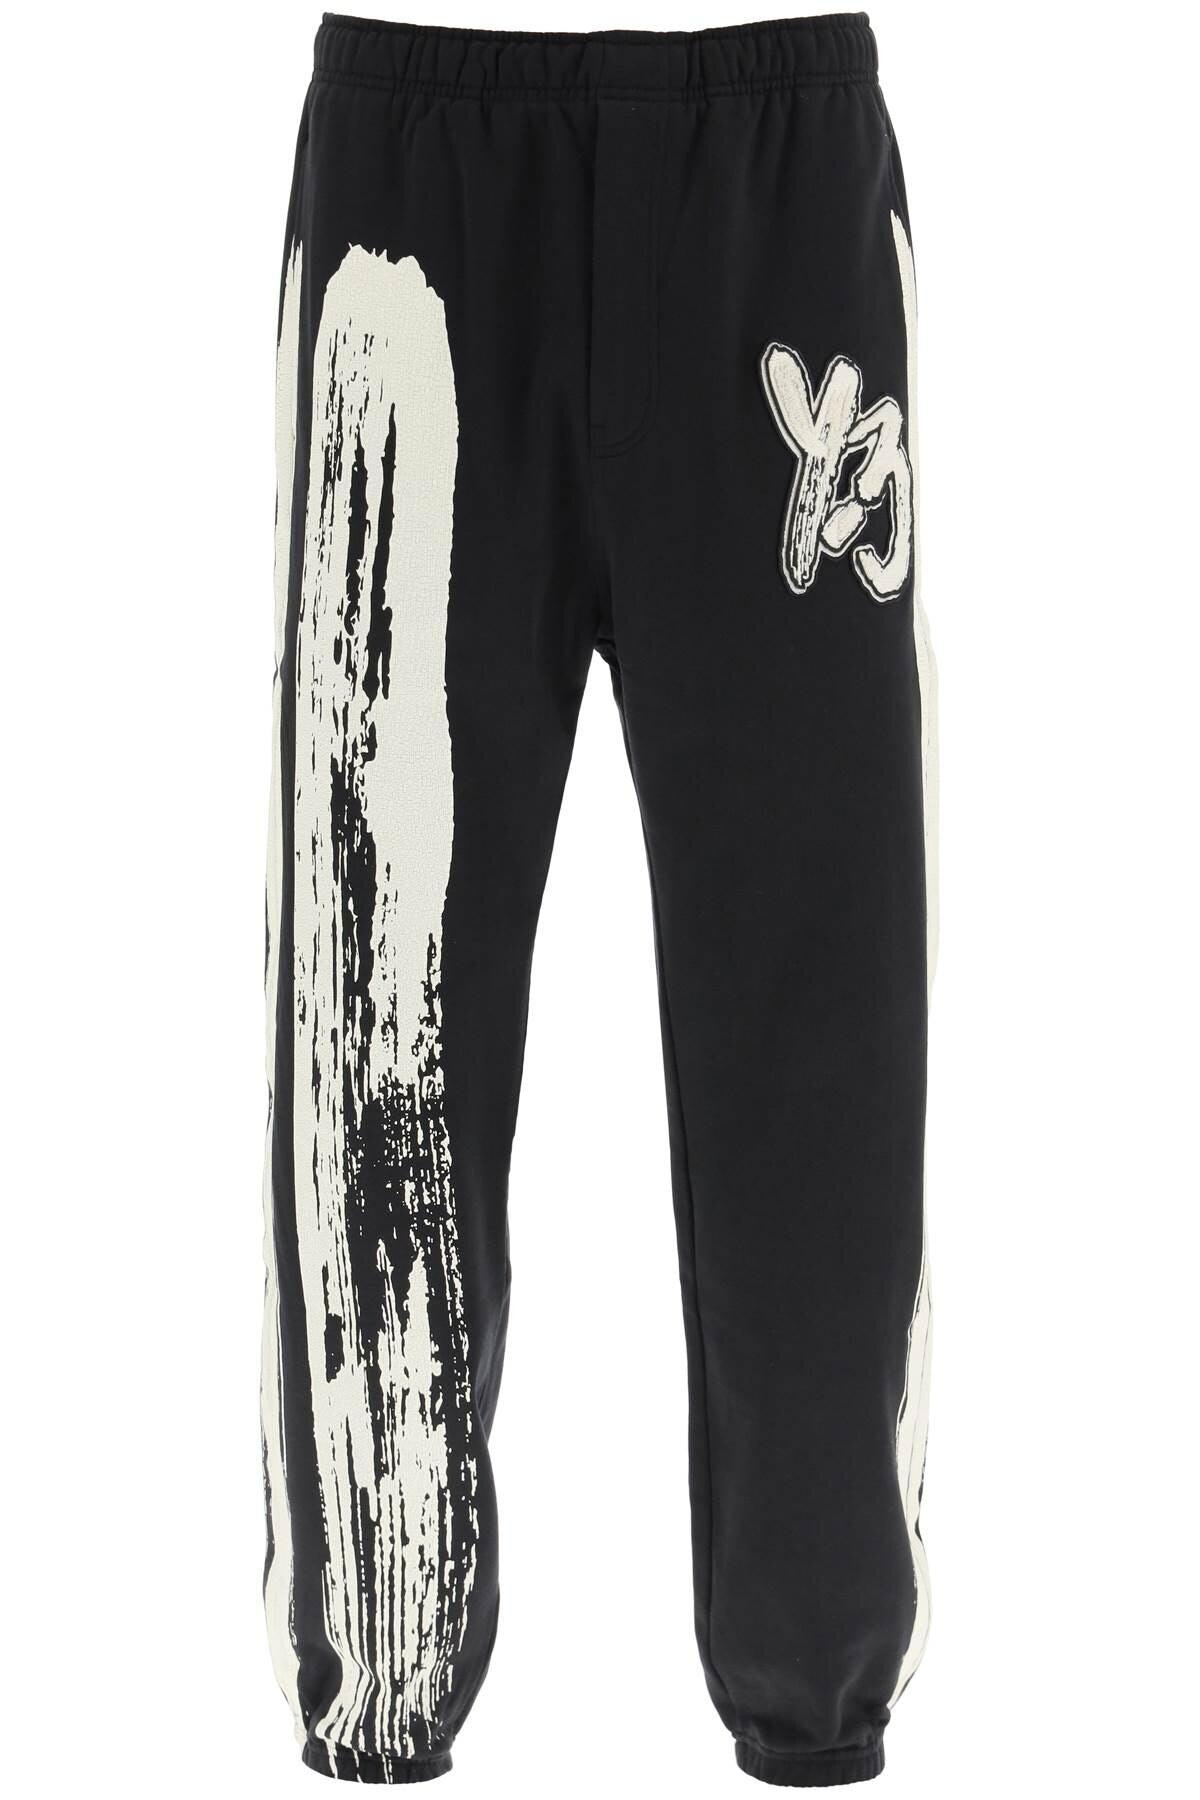 Y-3 Sweat Pants Featuring Paint-effect Print And Patch Logo in Black ...